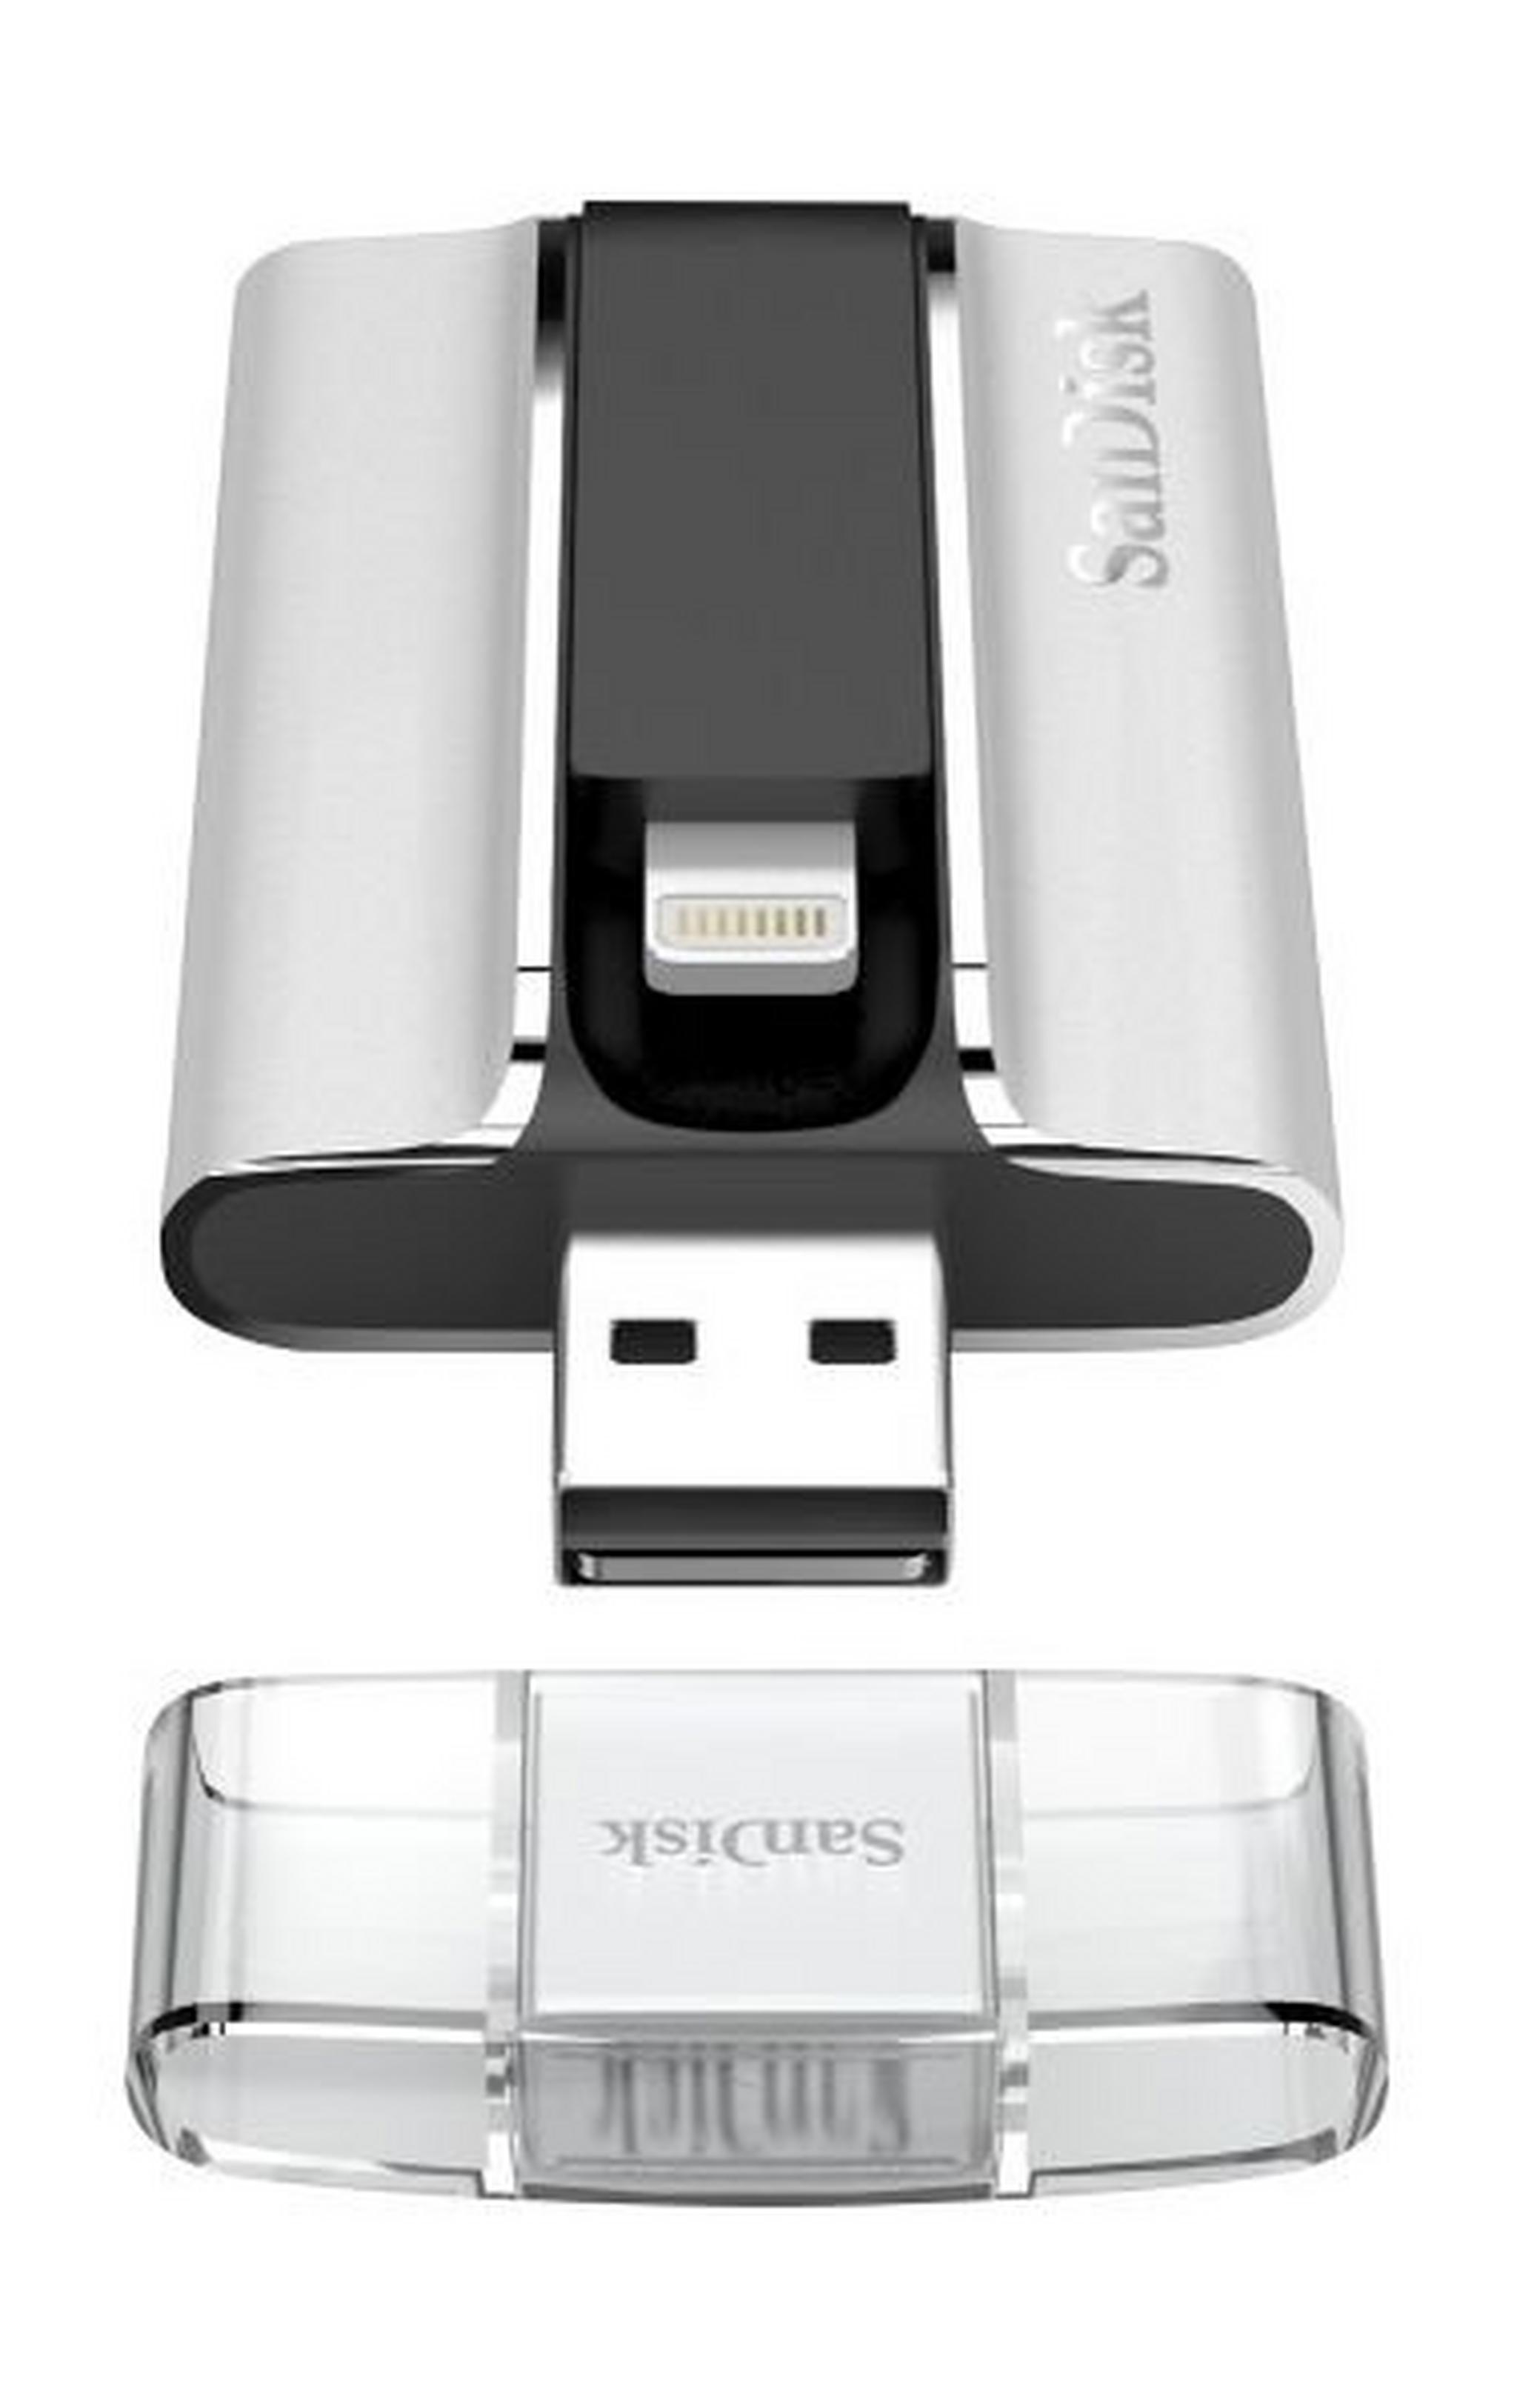 SanDisk SDIX-032G-G57 iXpand 32GB USB Flash Drive and Lightening Cable for iPhone, iPods and iPad